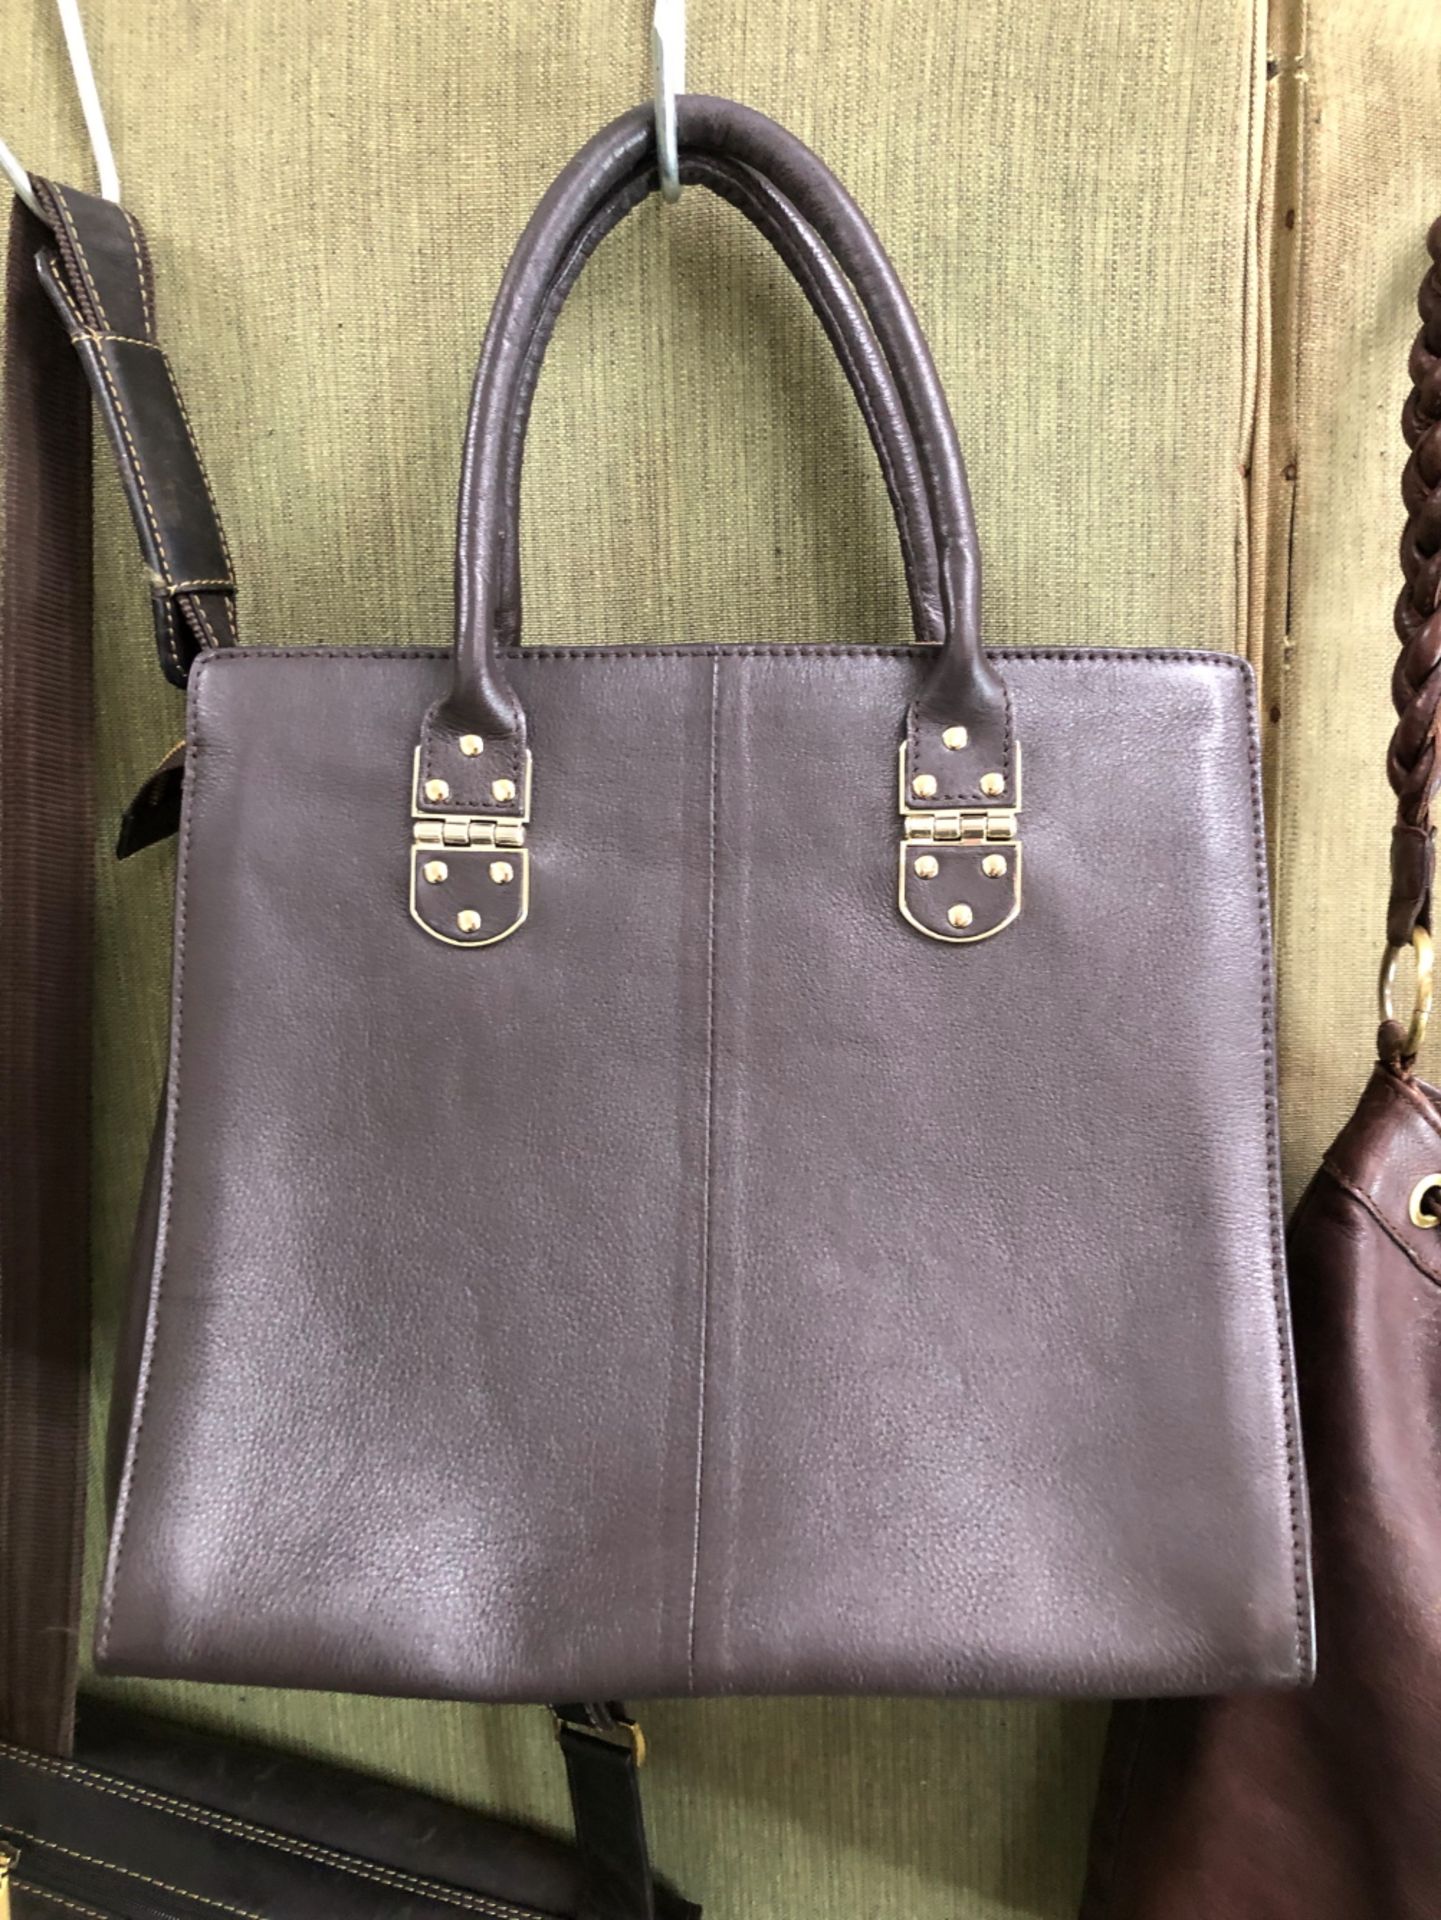 A ZARA WOMAN LARGE BROWN HANDBAG W 45cm, TOGETHER WITH A DARK BROWN LEATHER PAUL COSTELLOE BAG, A - Image 9 of 11